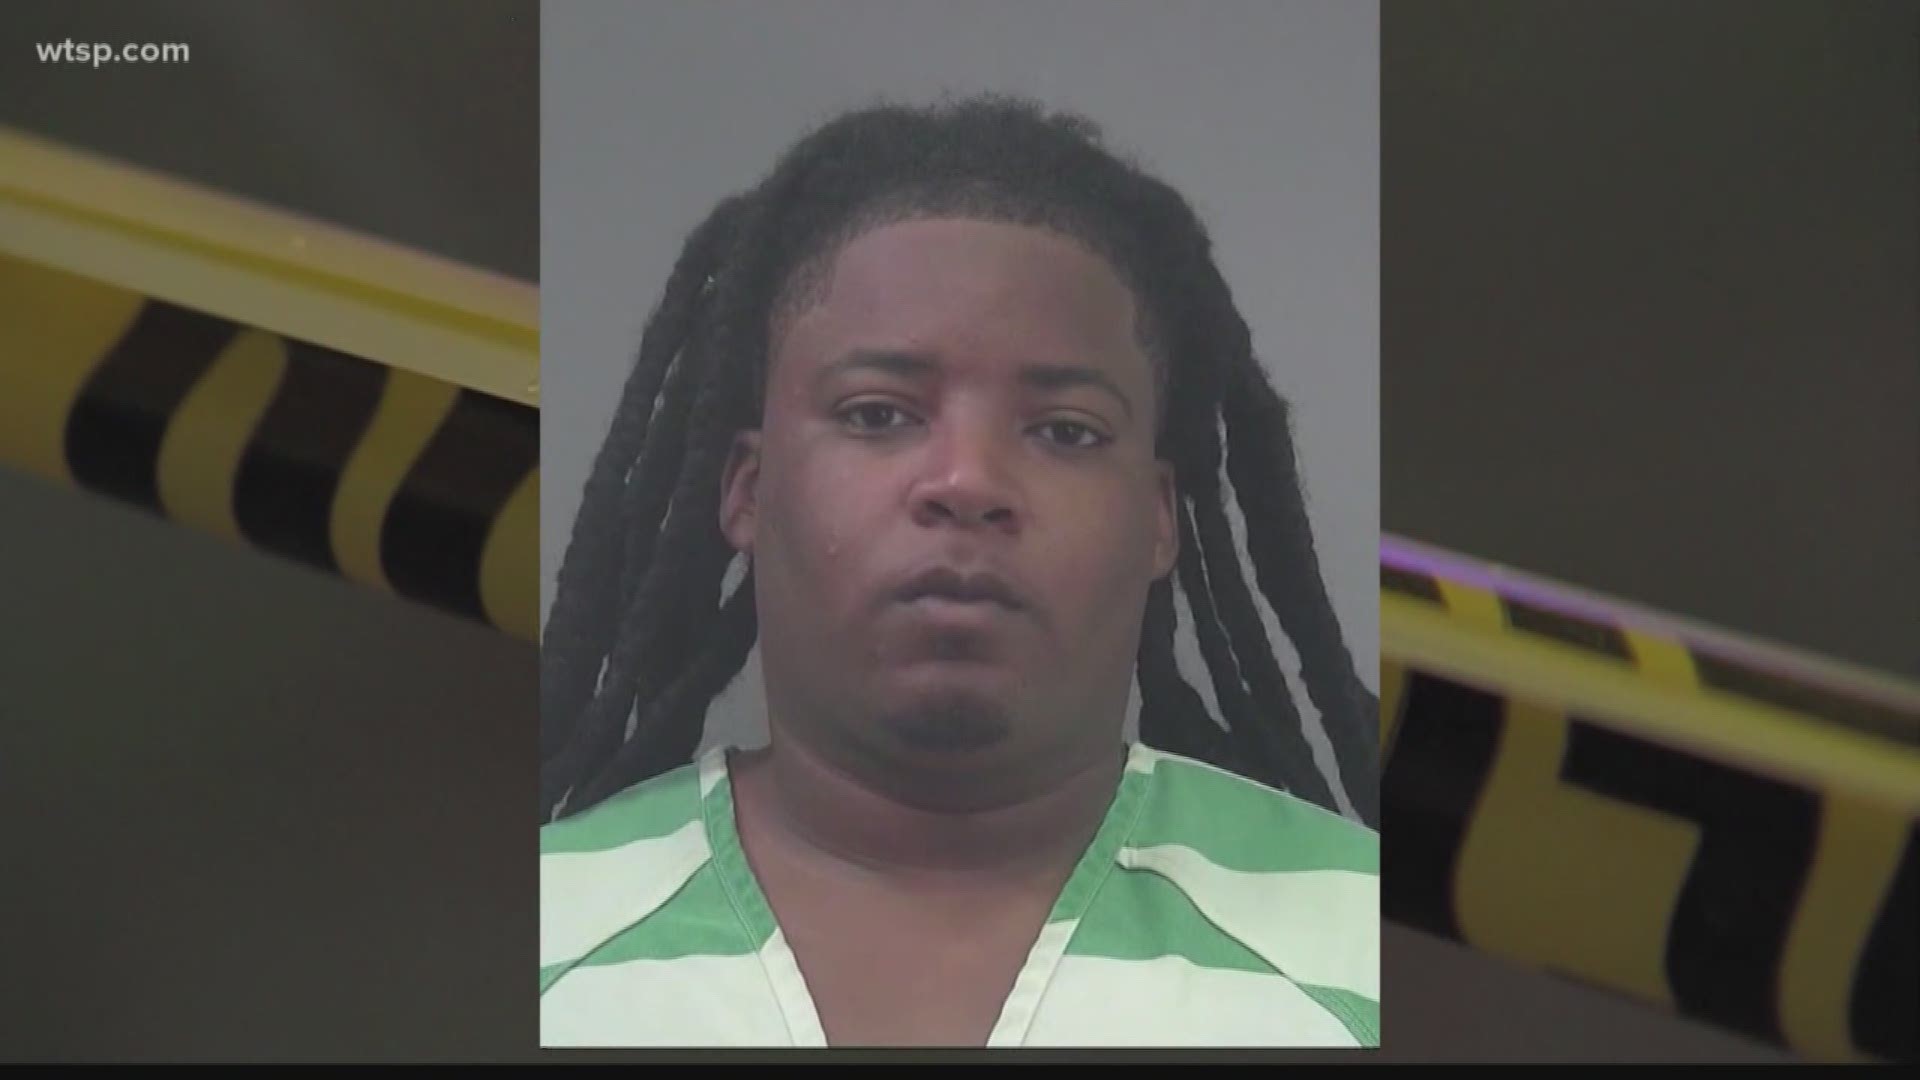 The Alachua County Sheriff's Office said Ezekiel Hicks was seen on surveillance video shooting the victim in the head.